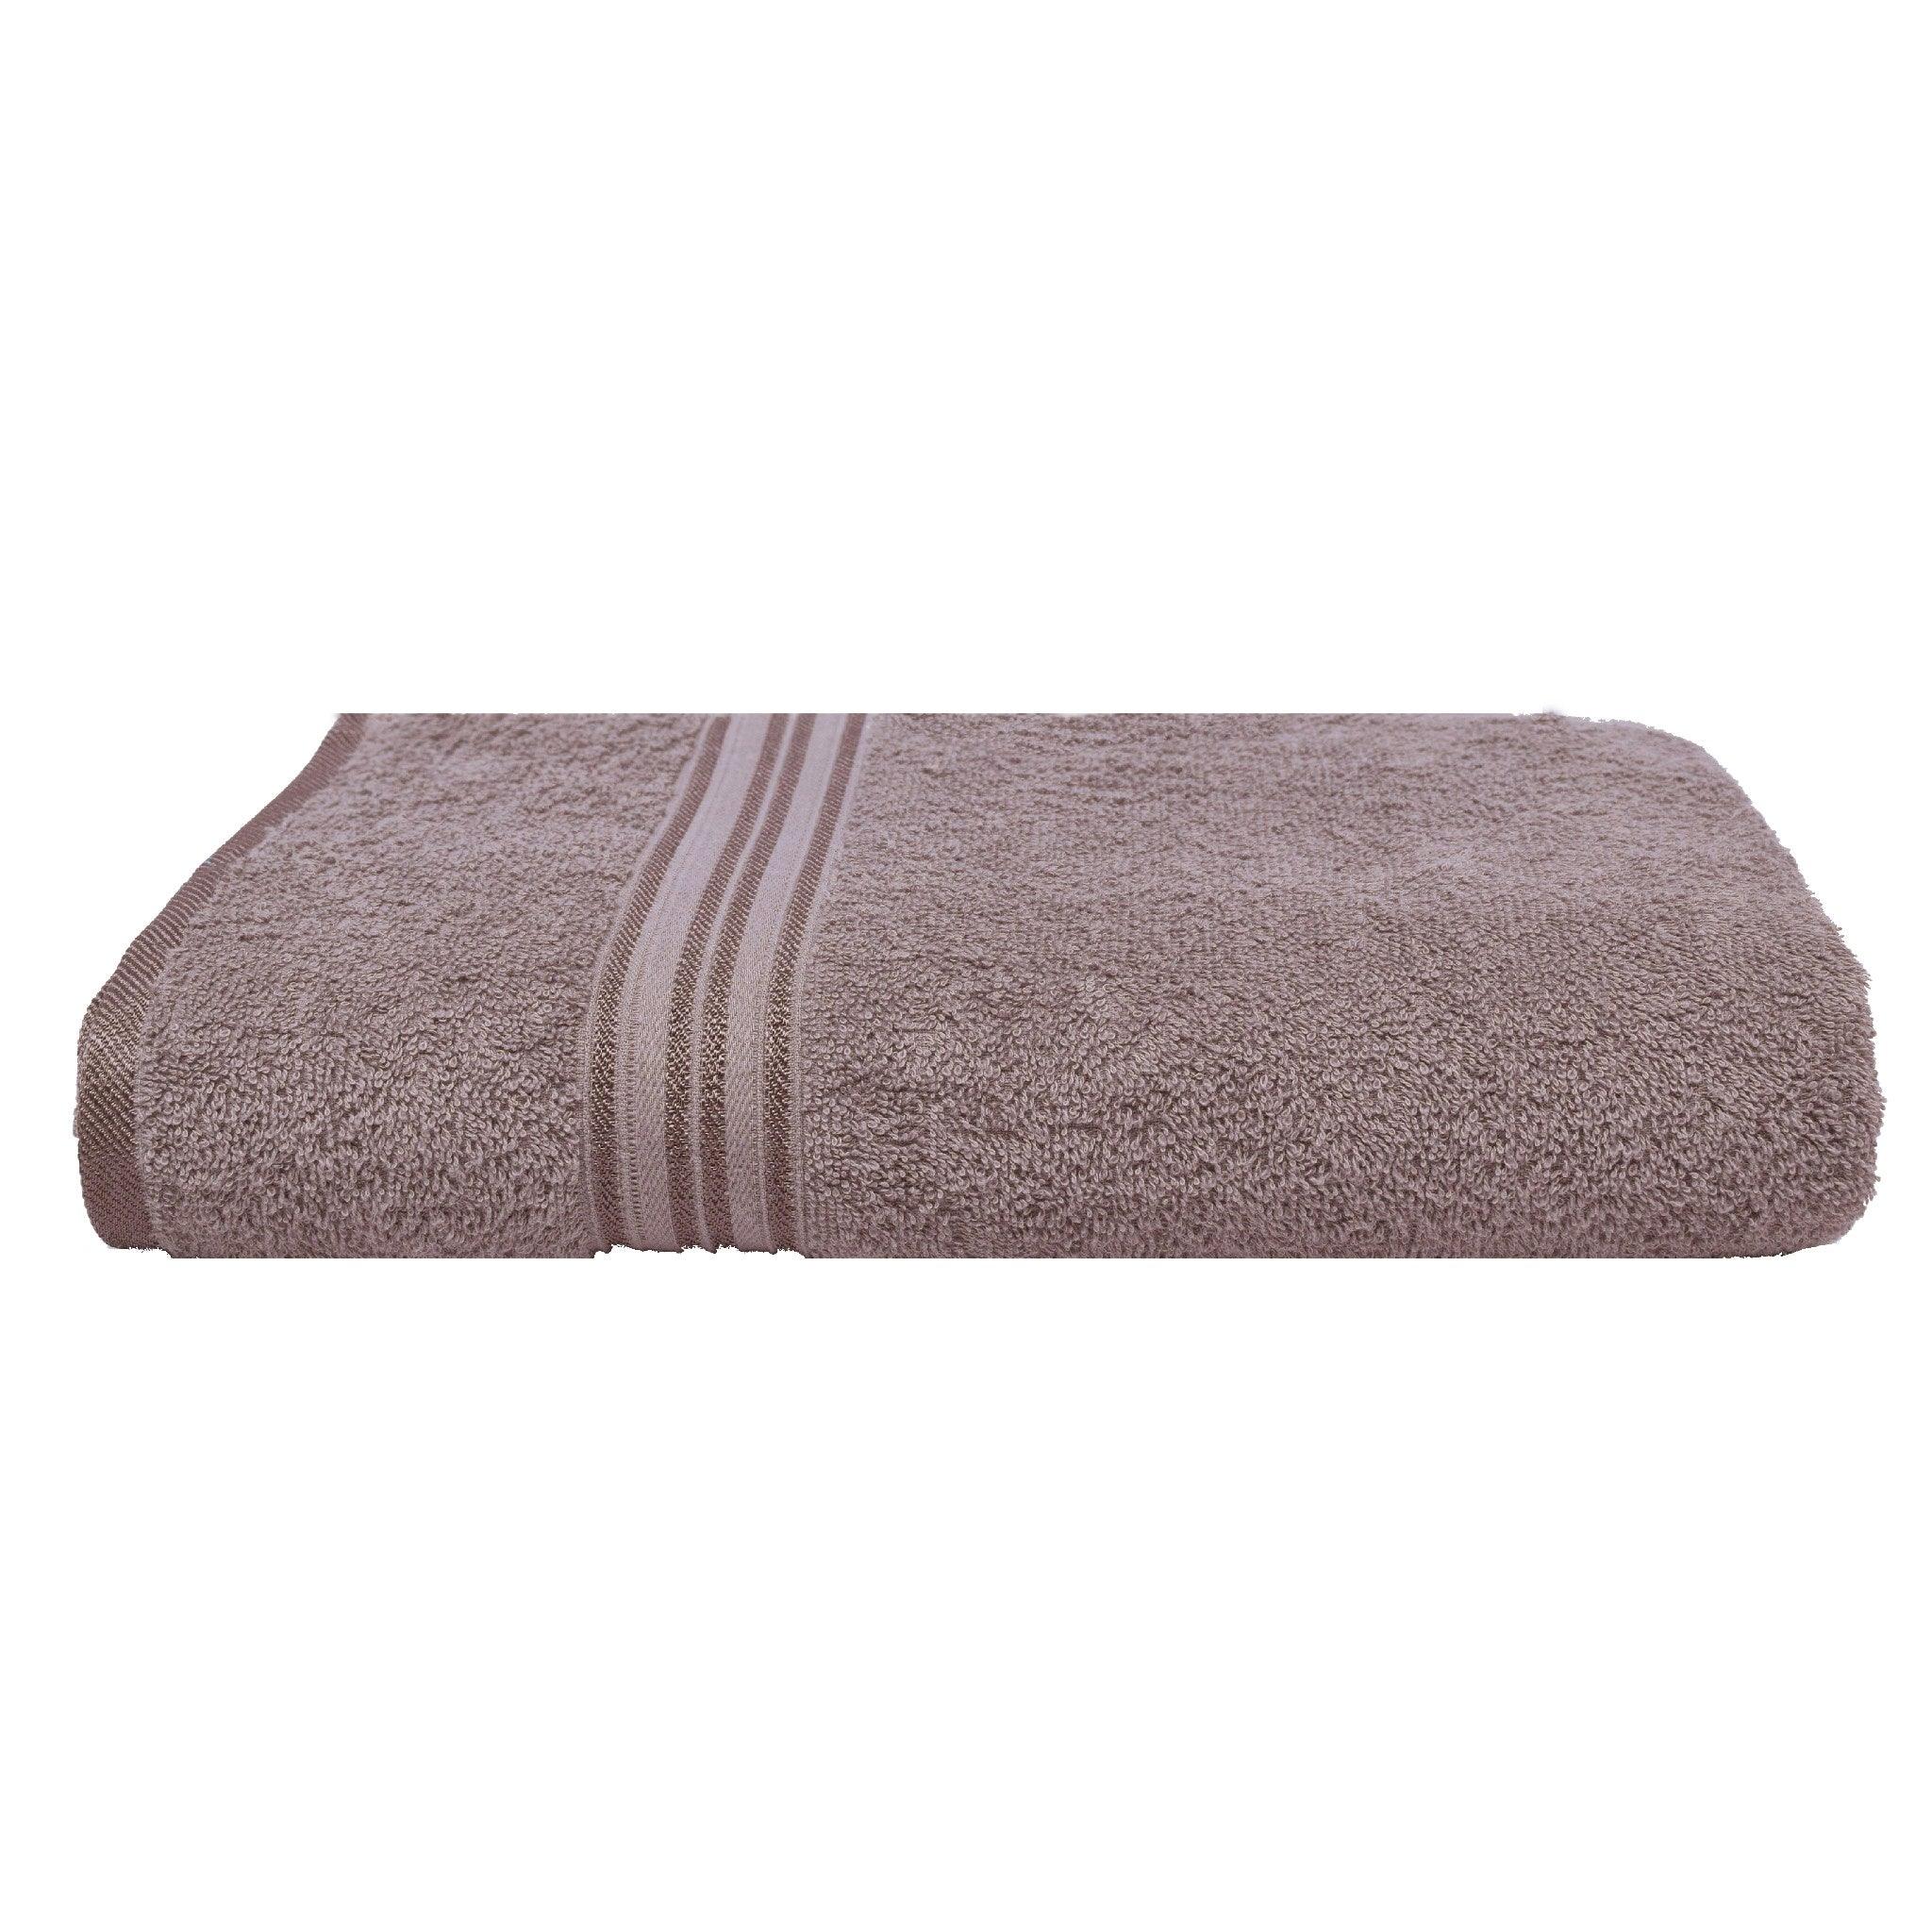 Super Comfy 100% Cotton Junior Bath Towel | Ultra Soft, Lightweight and Quick Drying Towels